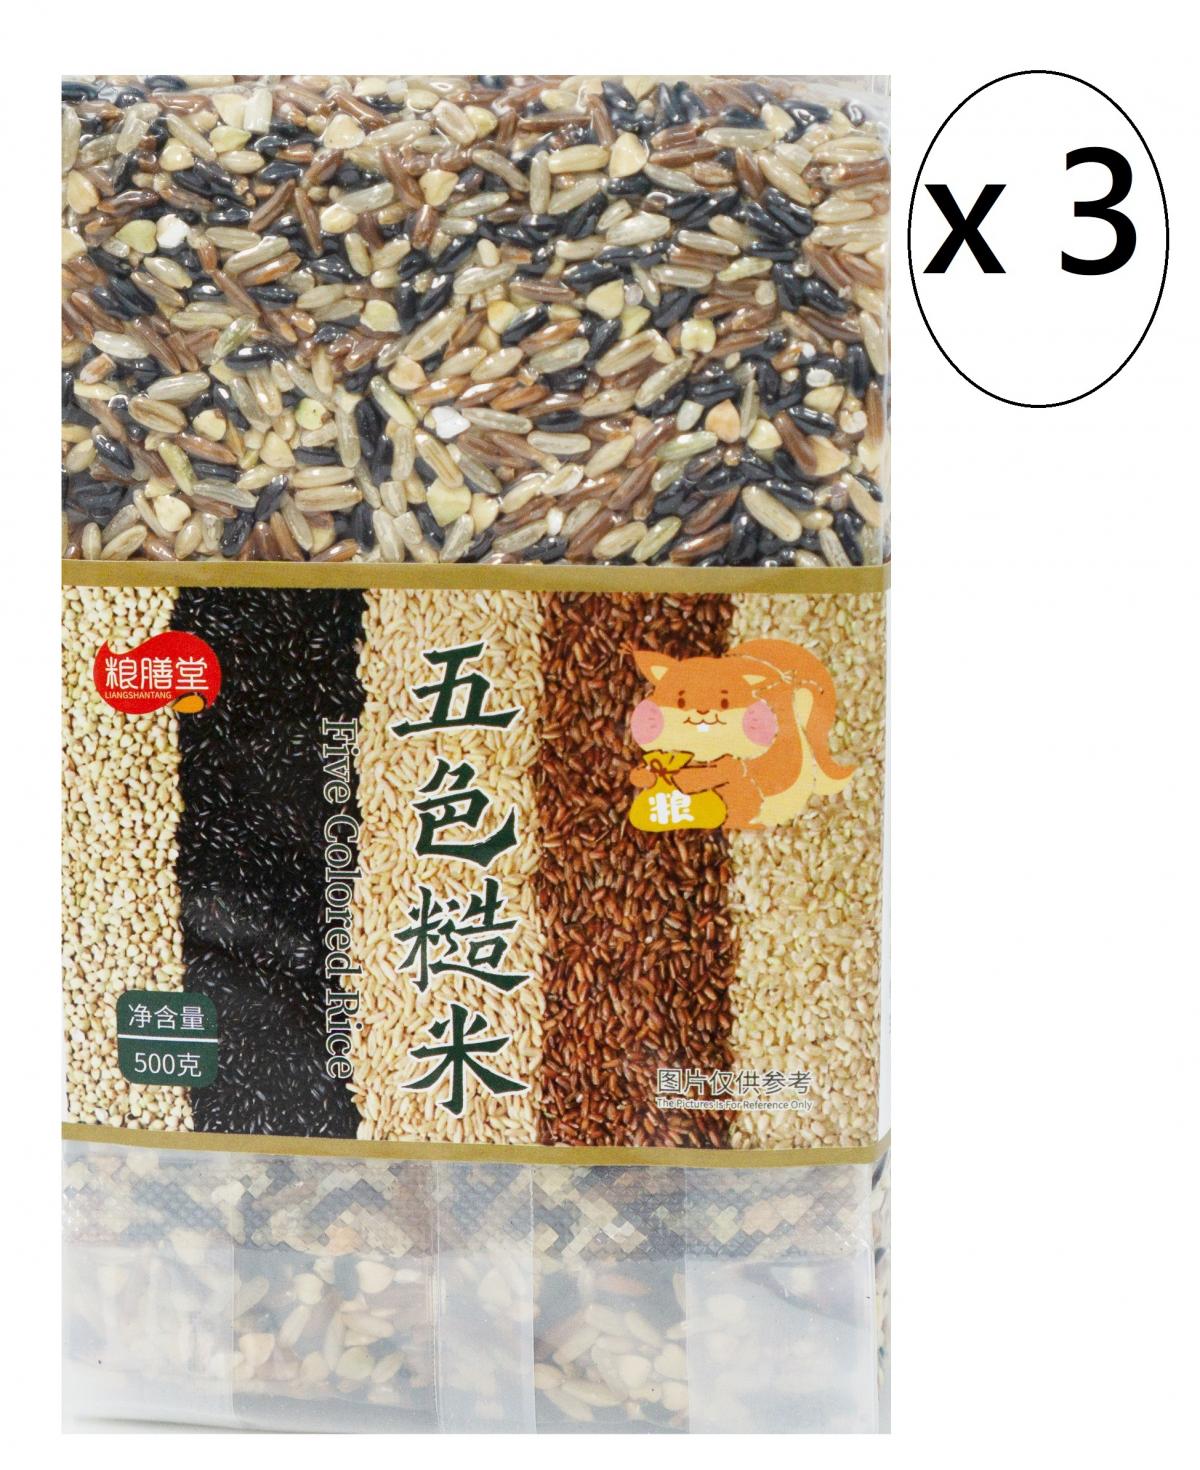 Five Colored Brown Rice 500g x 3